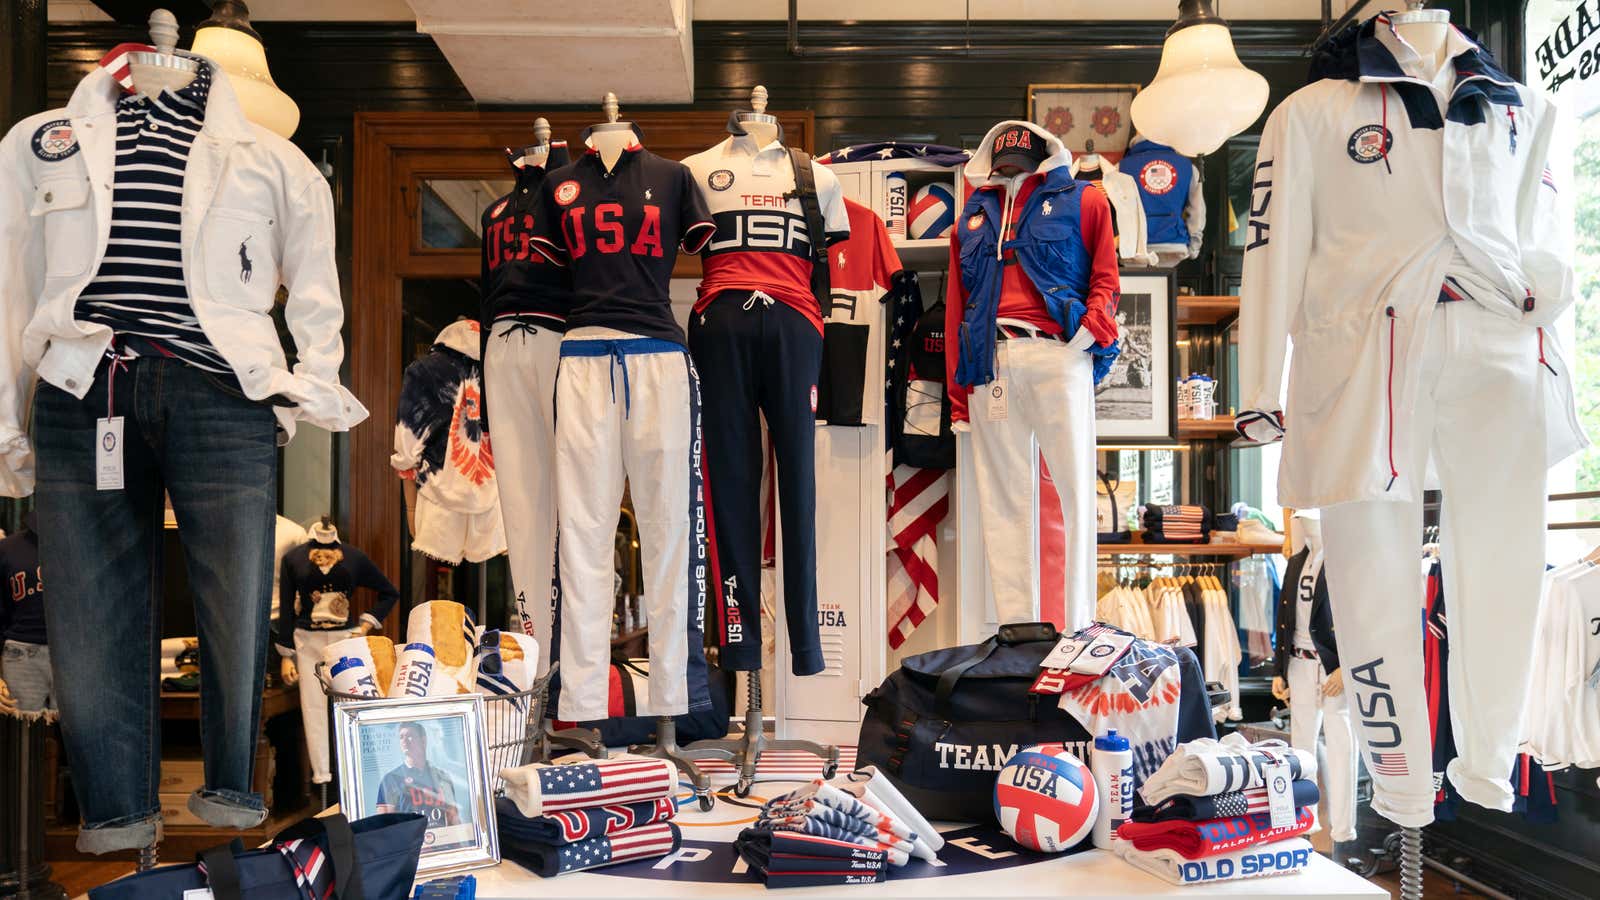 The official opening ceremony uniforms of the US Olympic team, designed by Ralph Lauren.